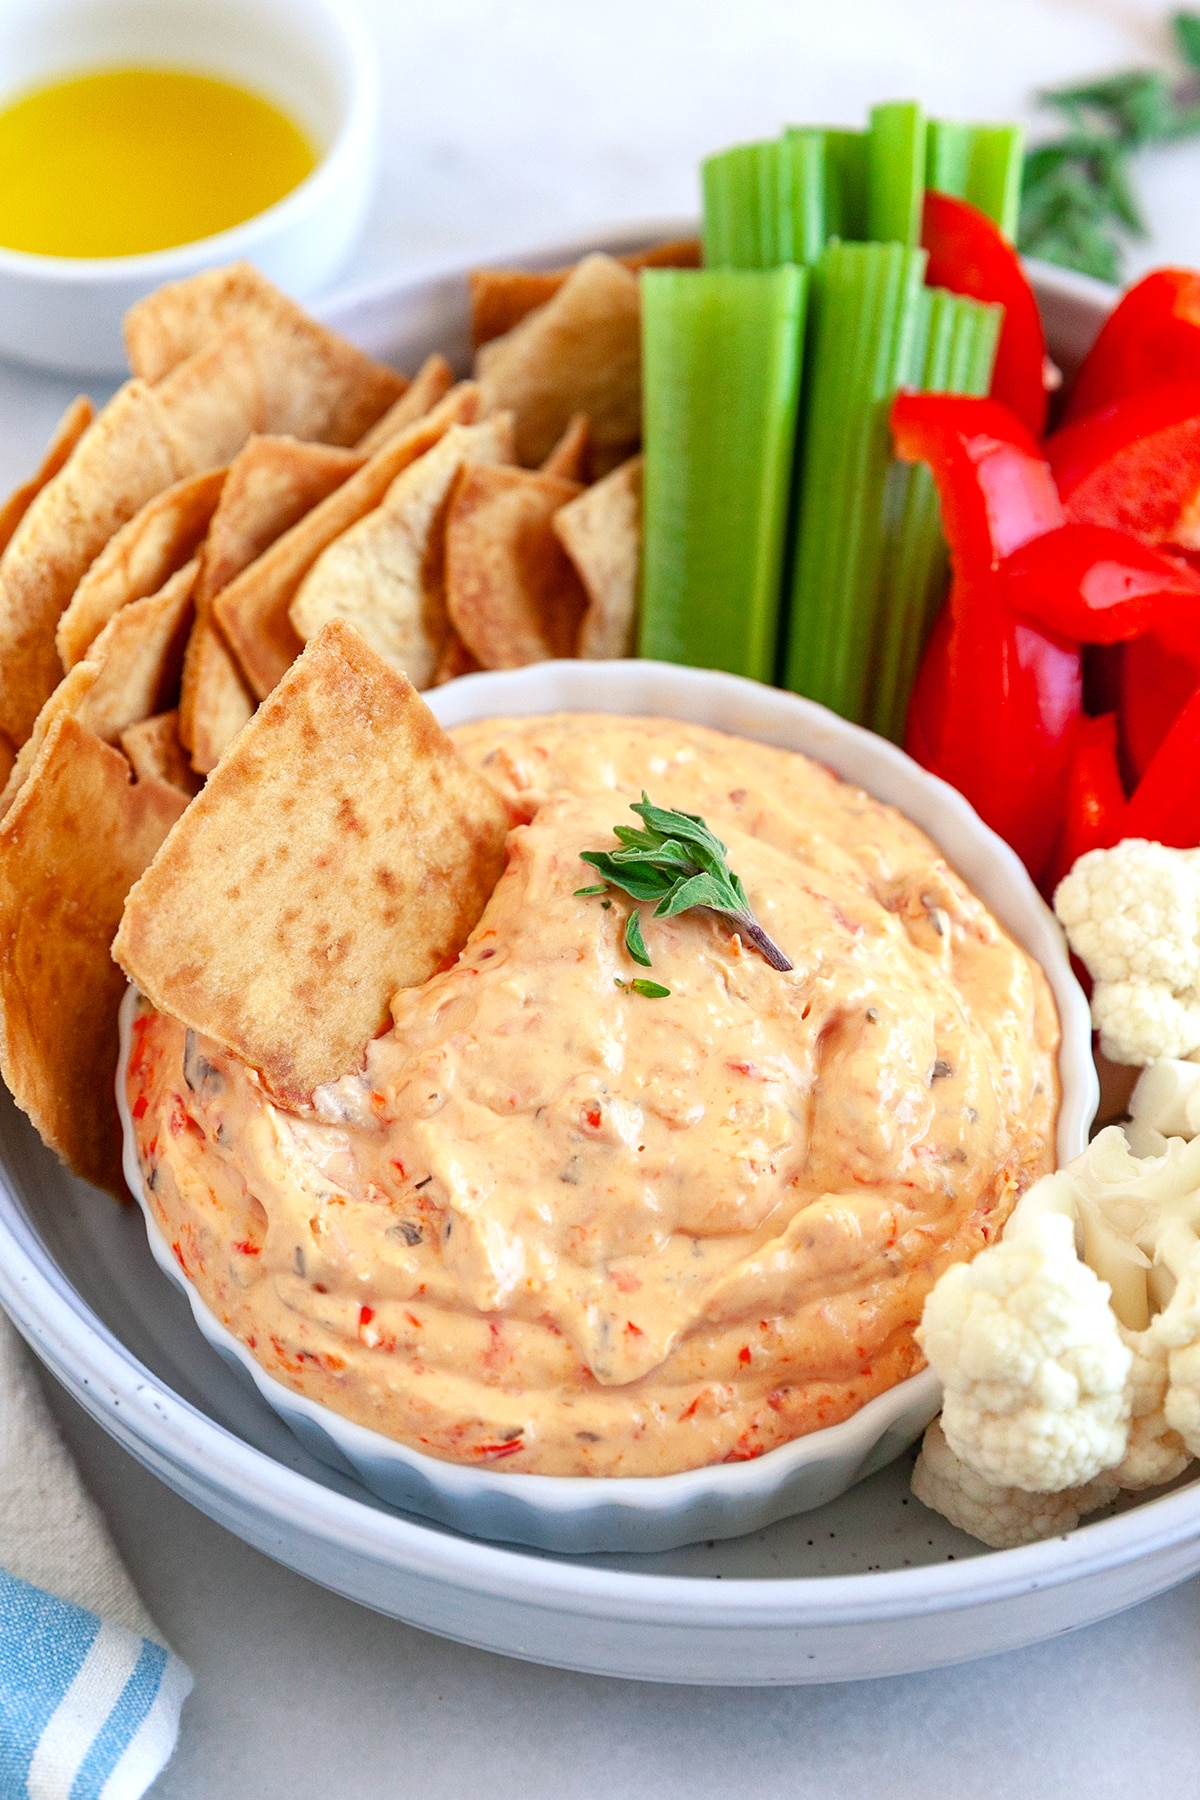 Feta Roasted Red Pepper Dip with pita chips and veggies. 